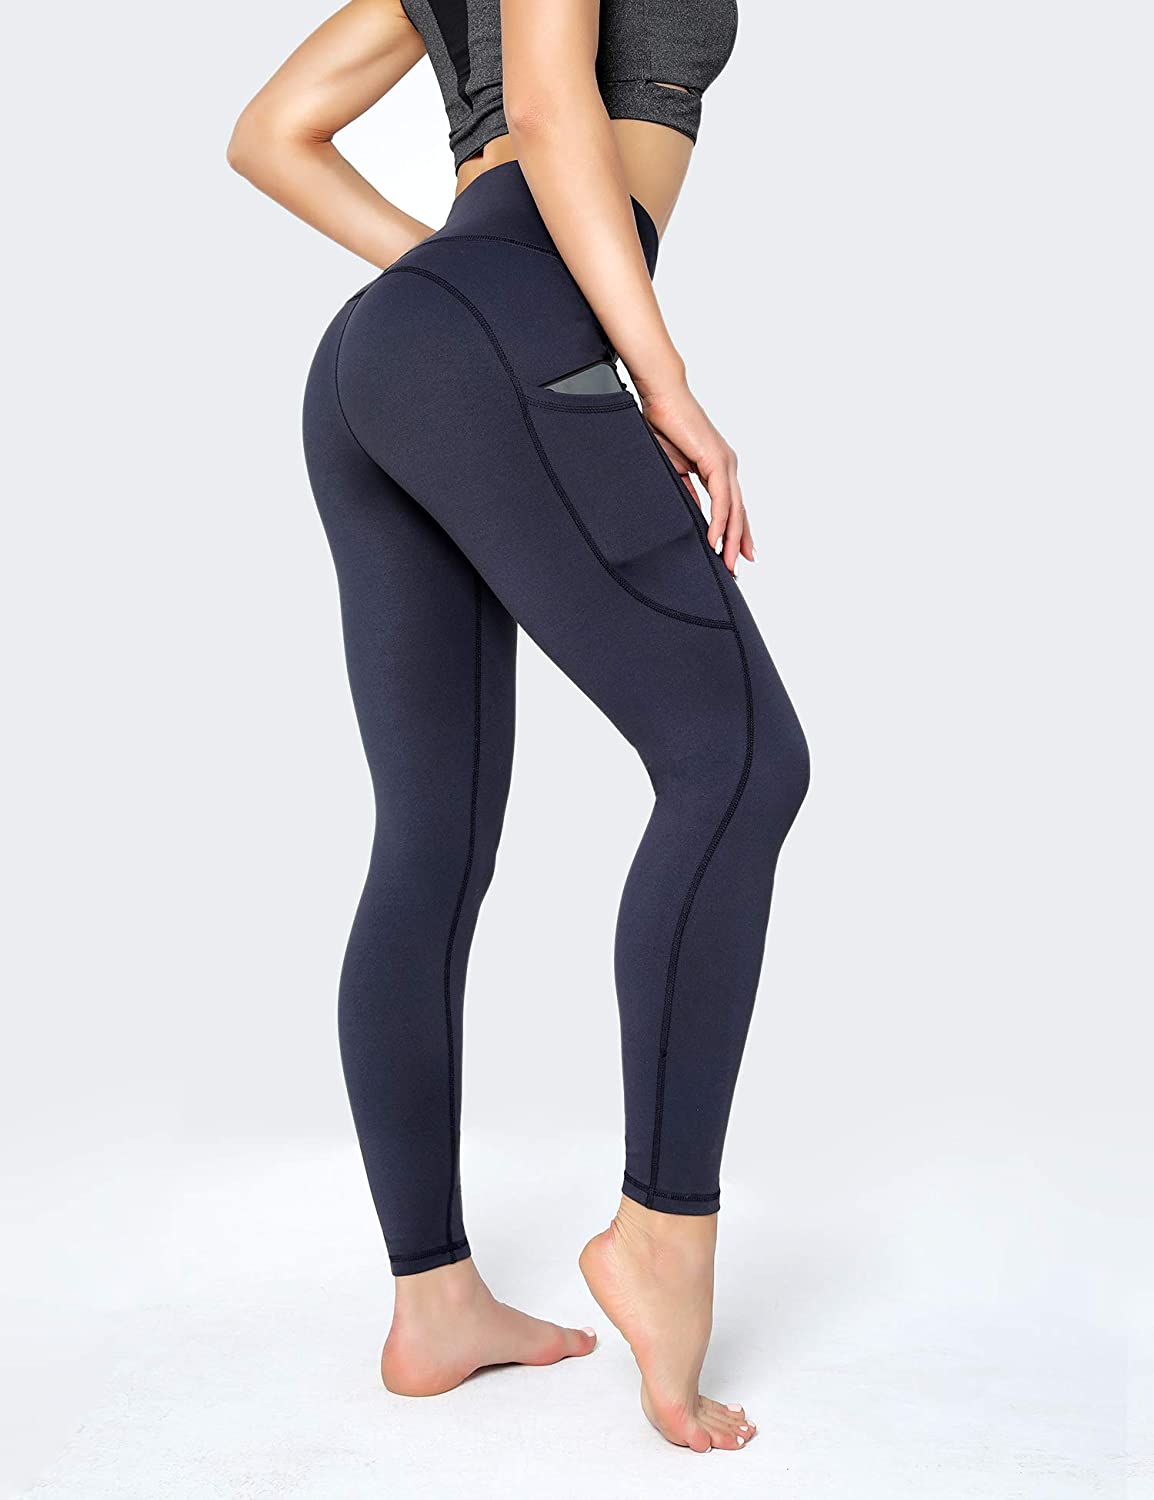 Two Types Of Yoga Pants For Women